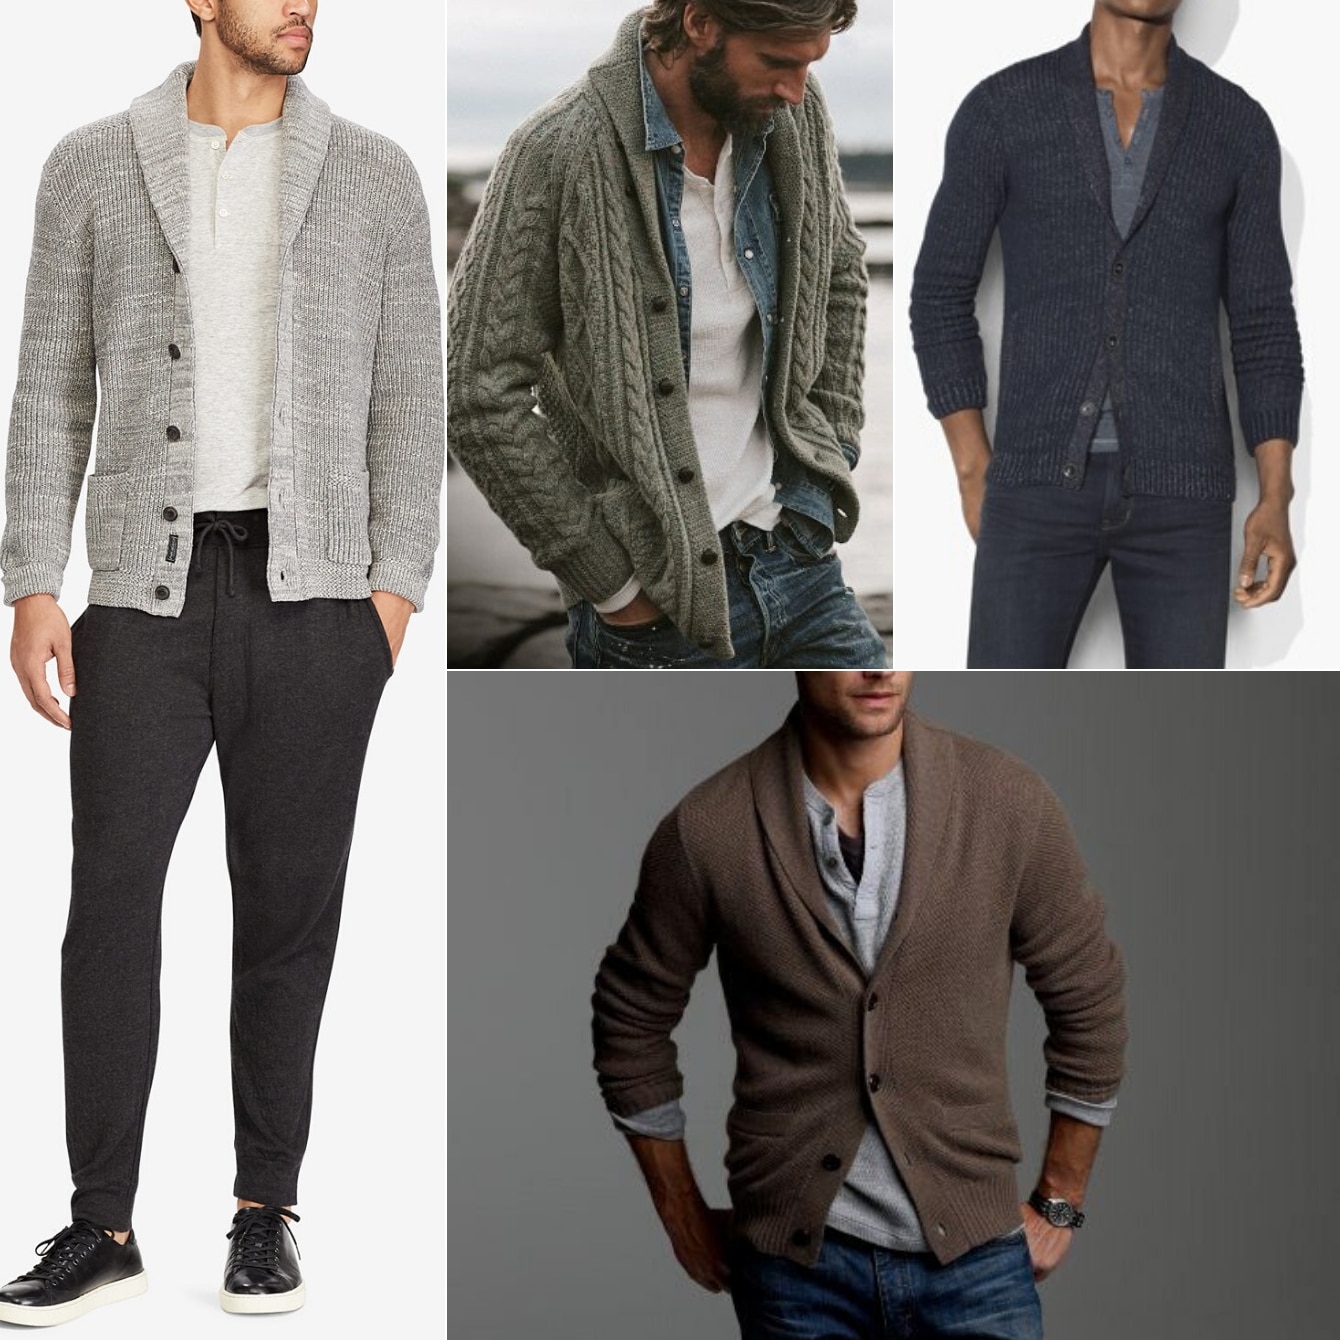 How to Wear a Cardigan: 11 Outfit Ideas 